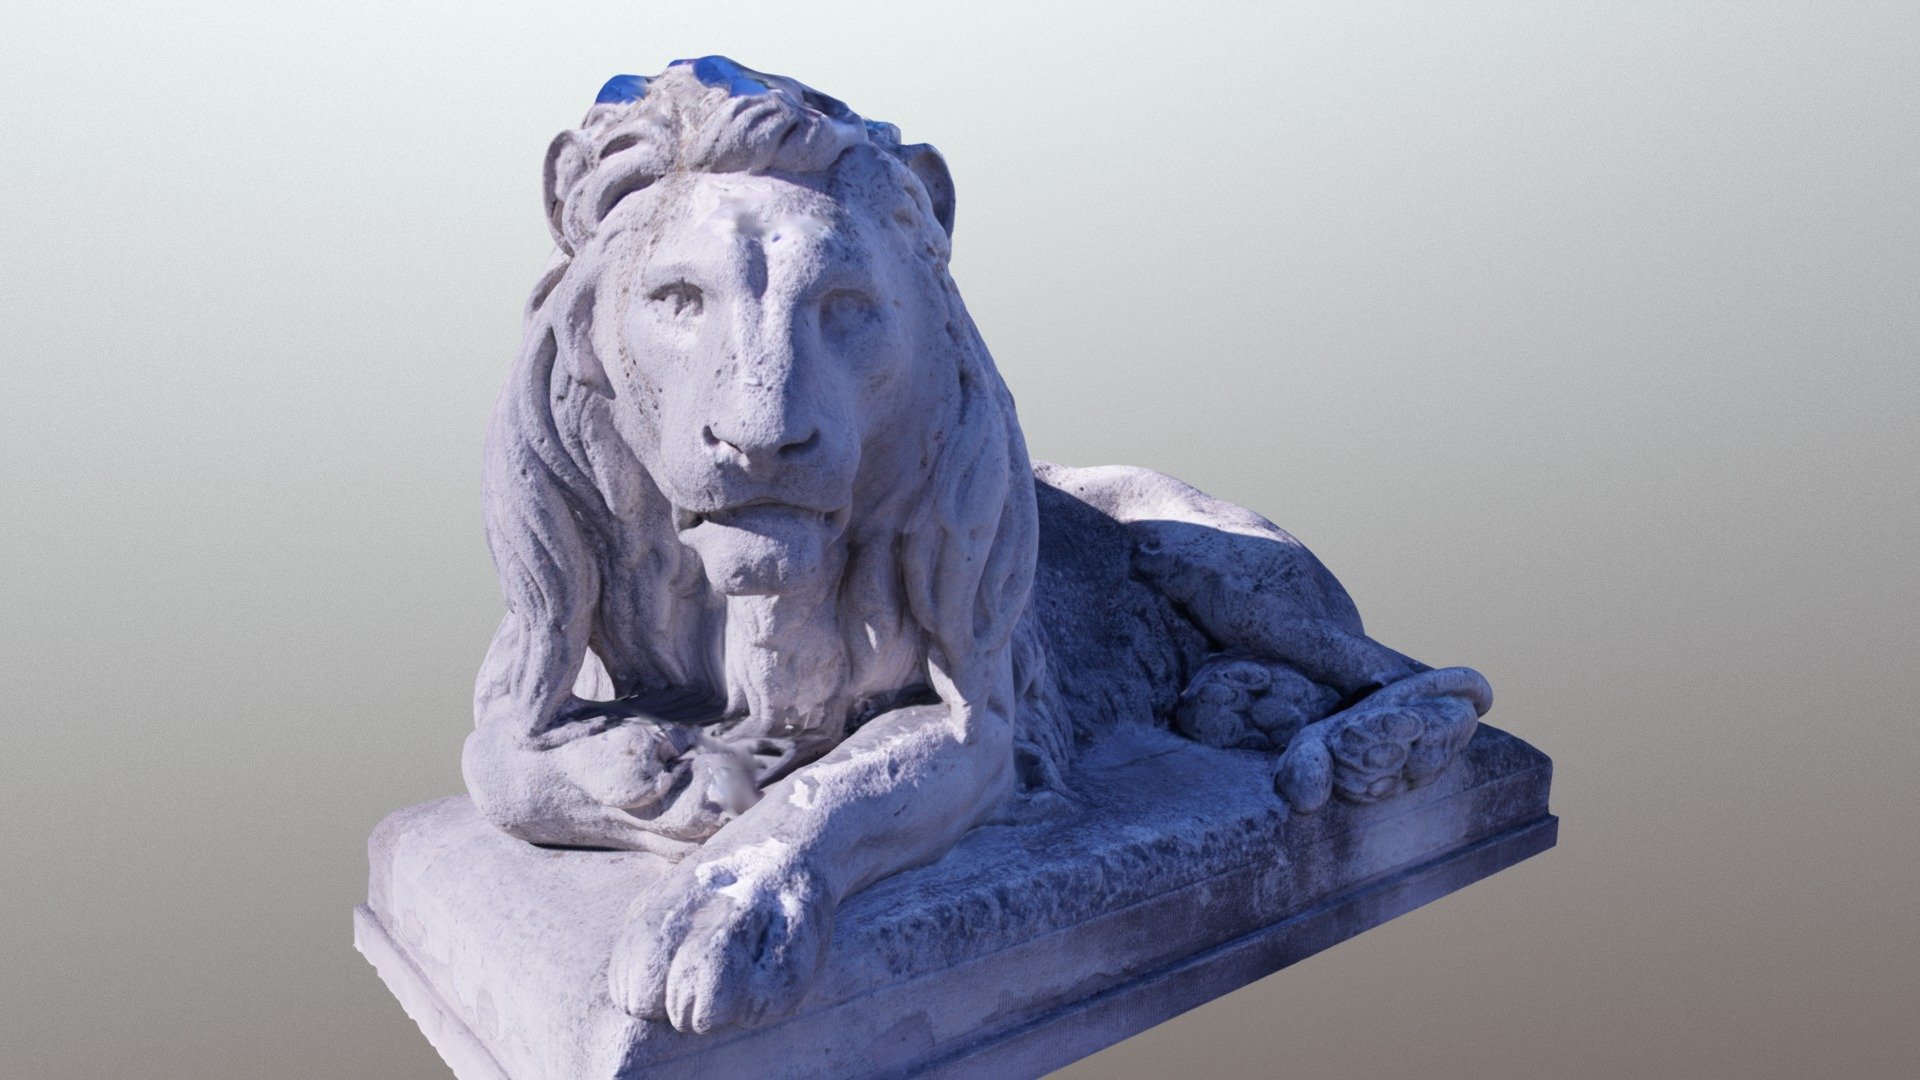 #3 - Stone Lion perched in its jungle